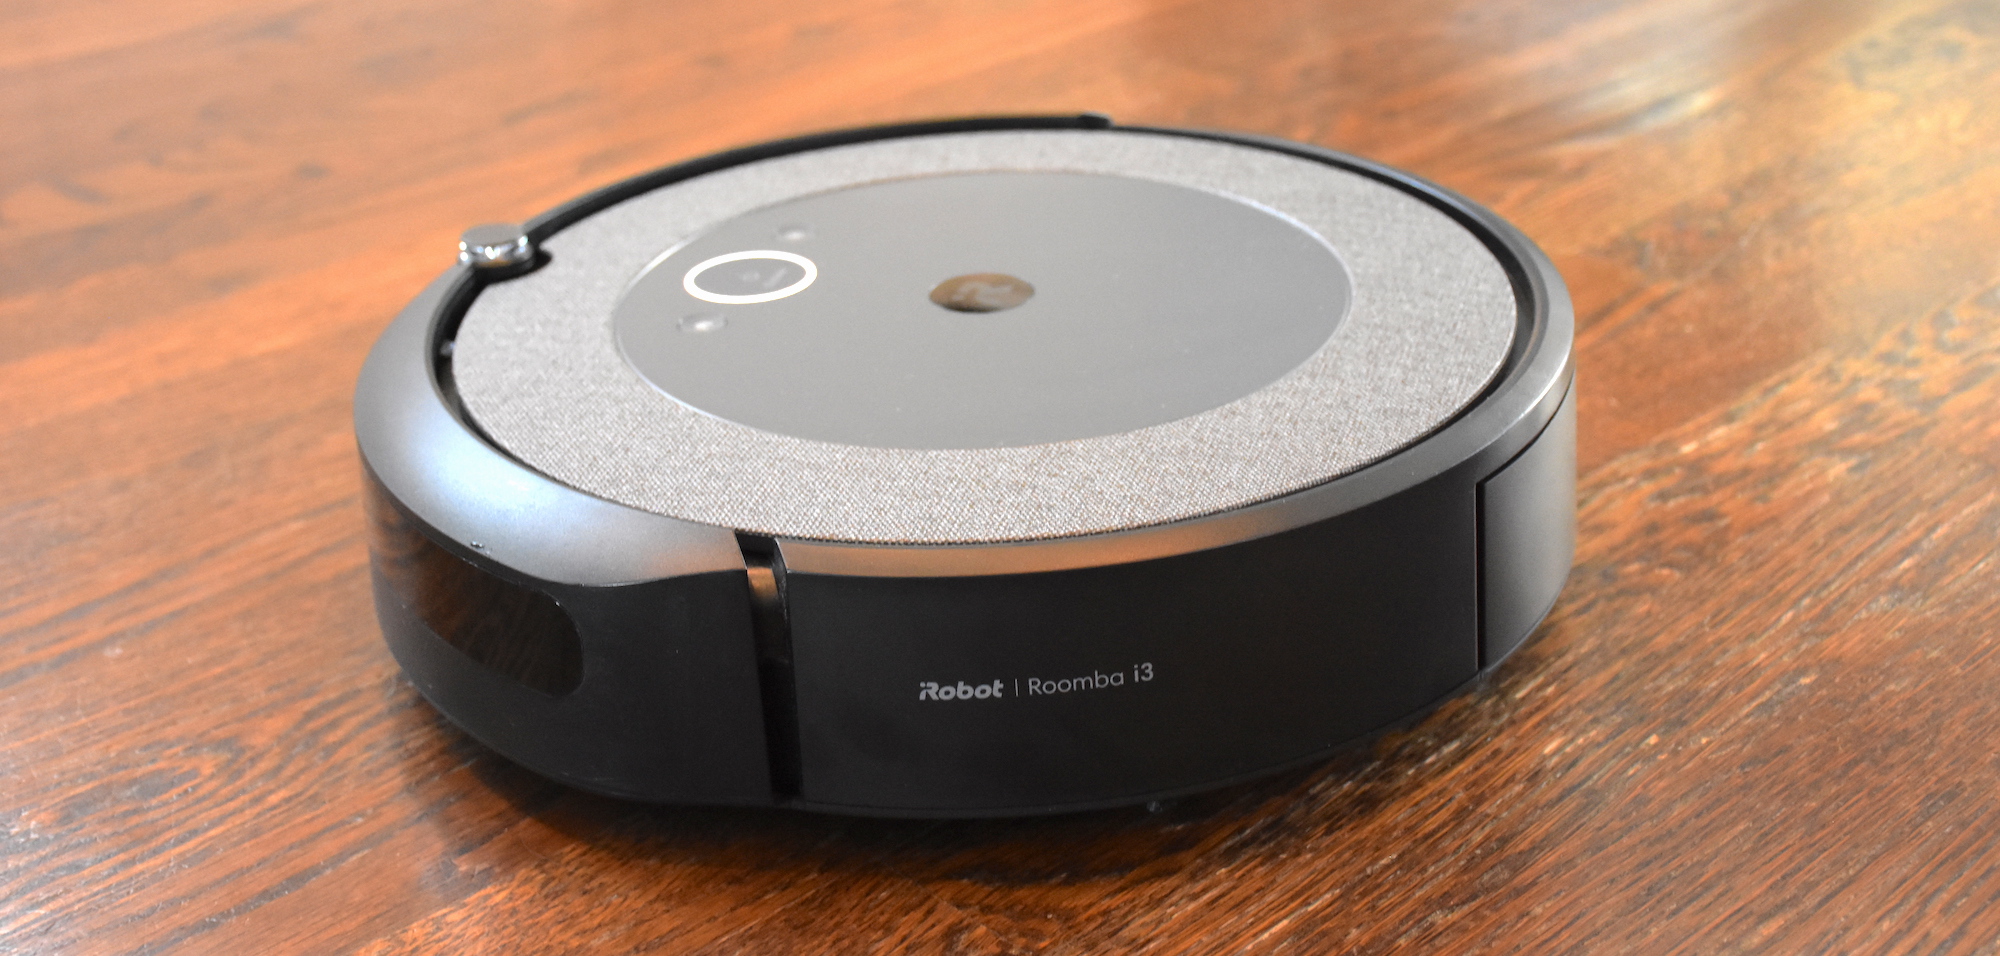 Save on the i3+ EVO Roomba, the Perfect Lazy Person Robot Vacuum